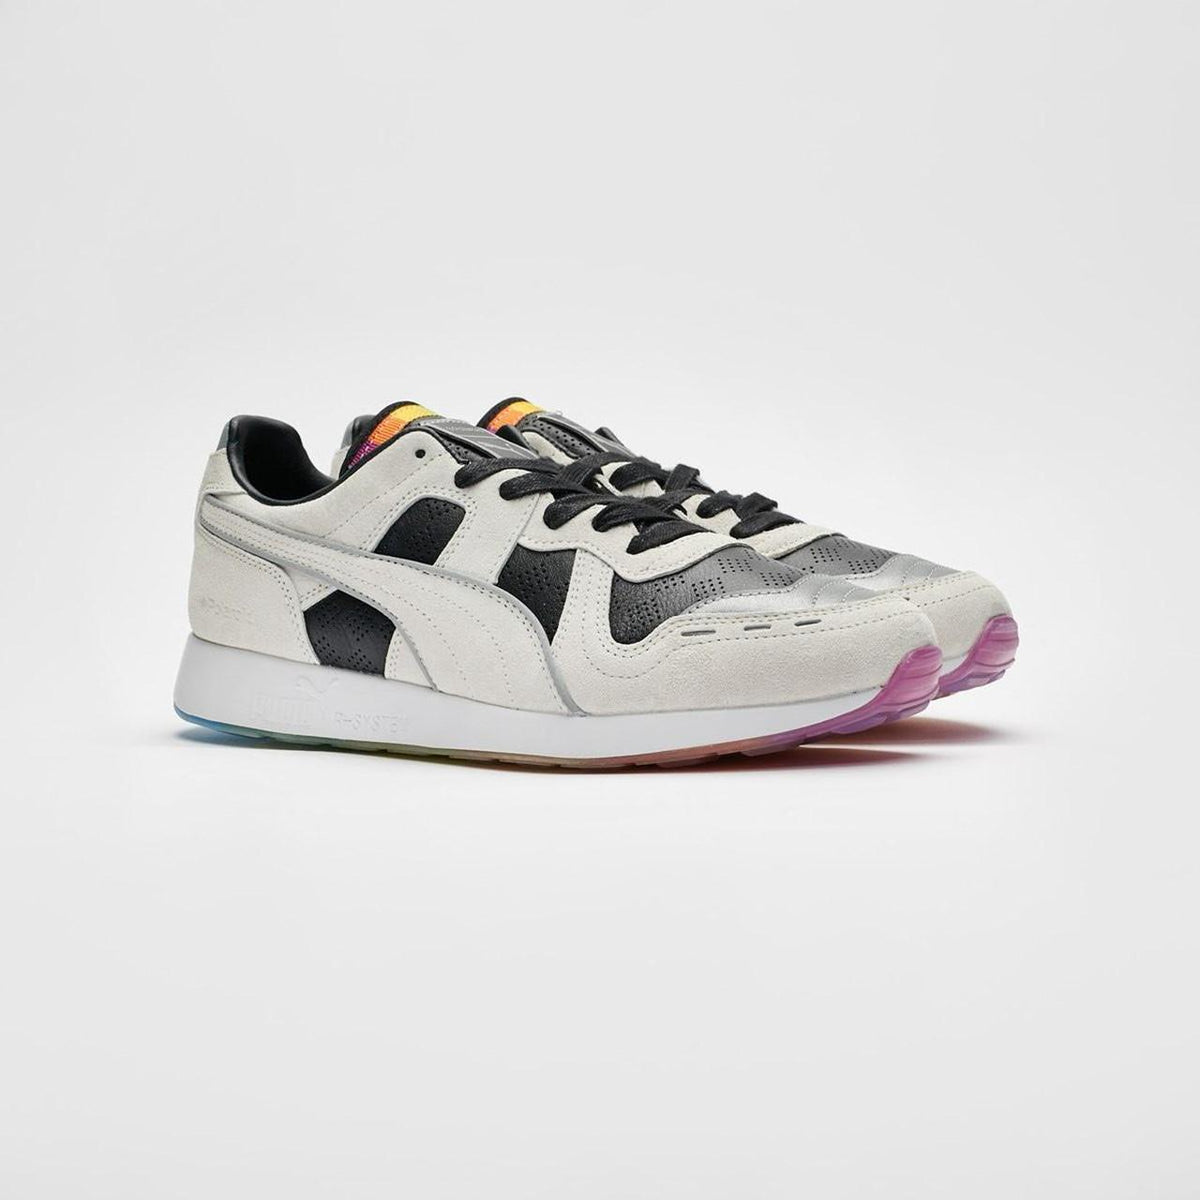 Puma RS-100 X Polaroid Limited Edition Running Shoes Trainers